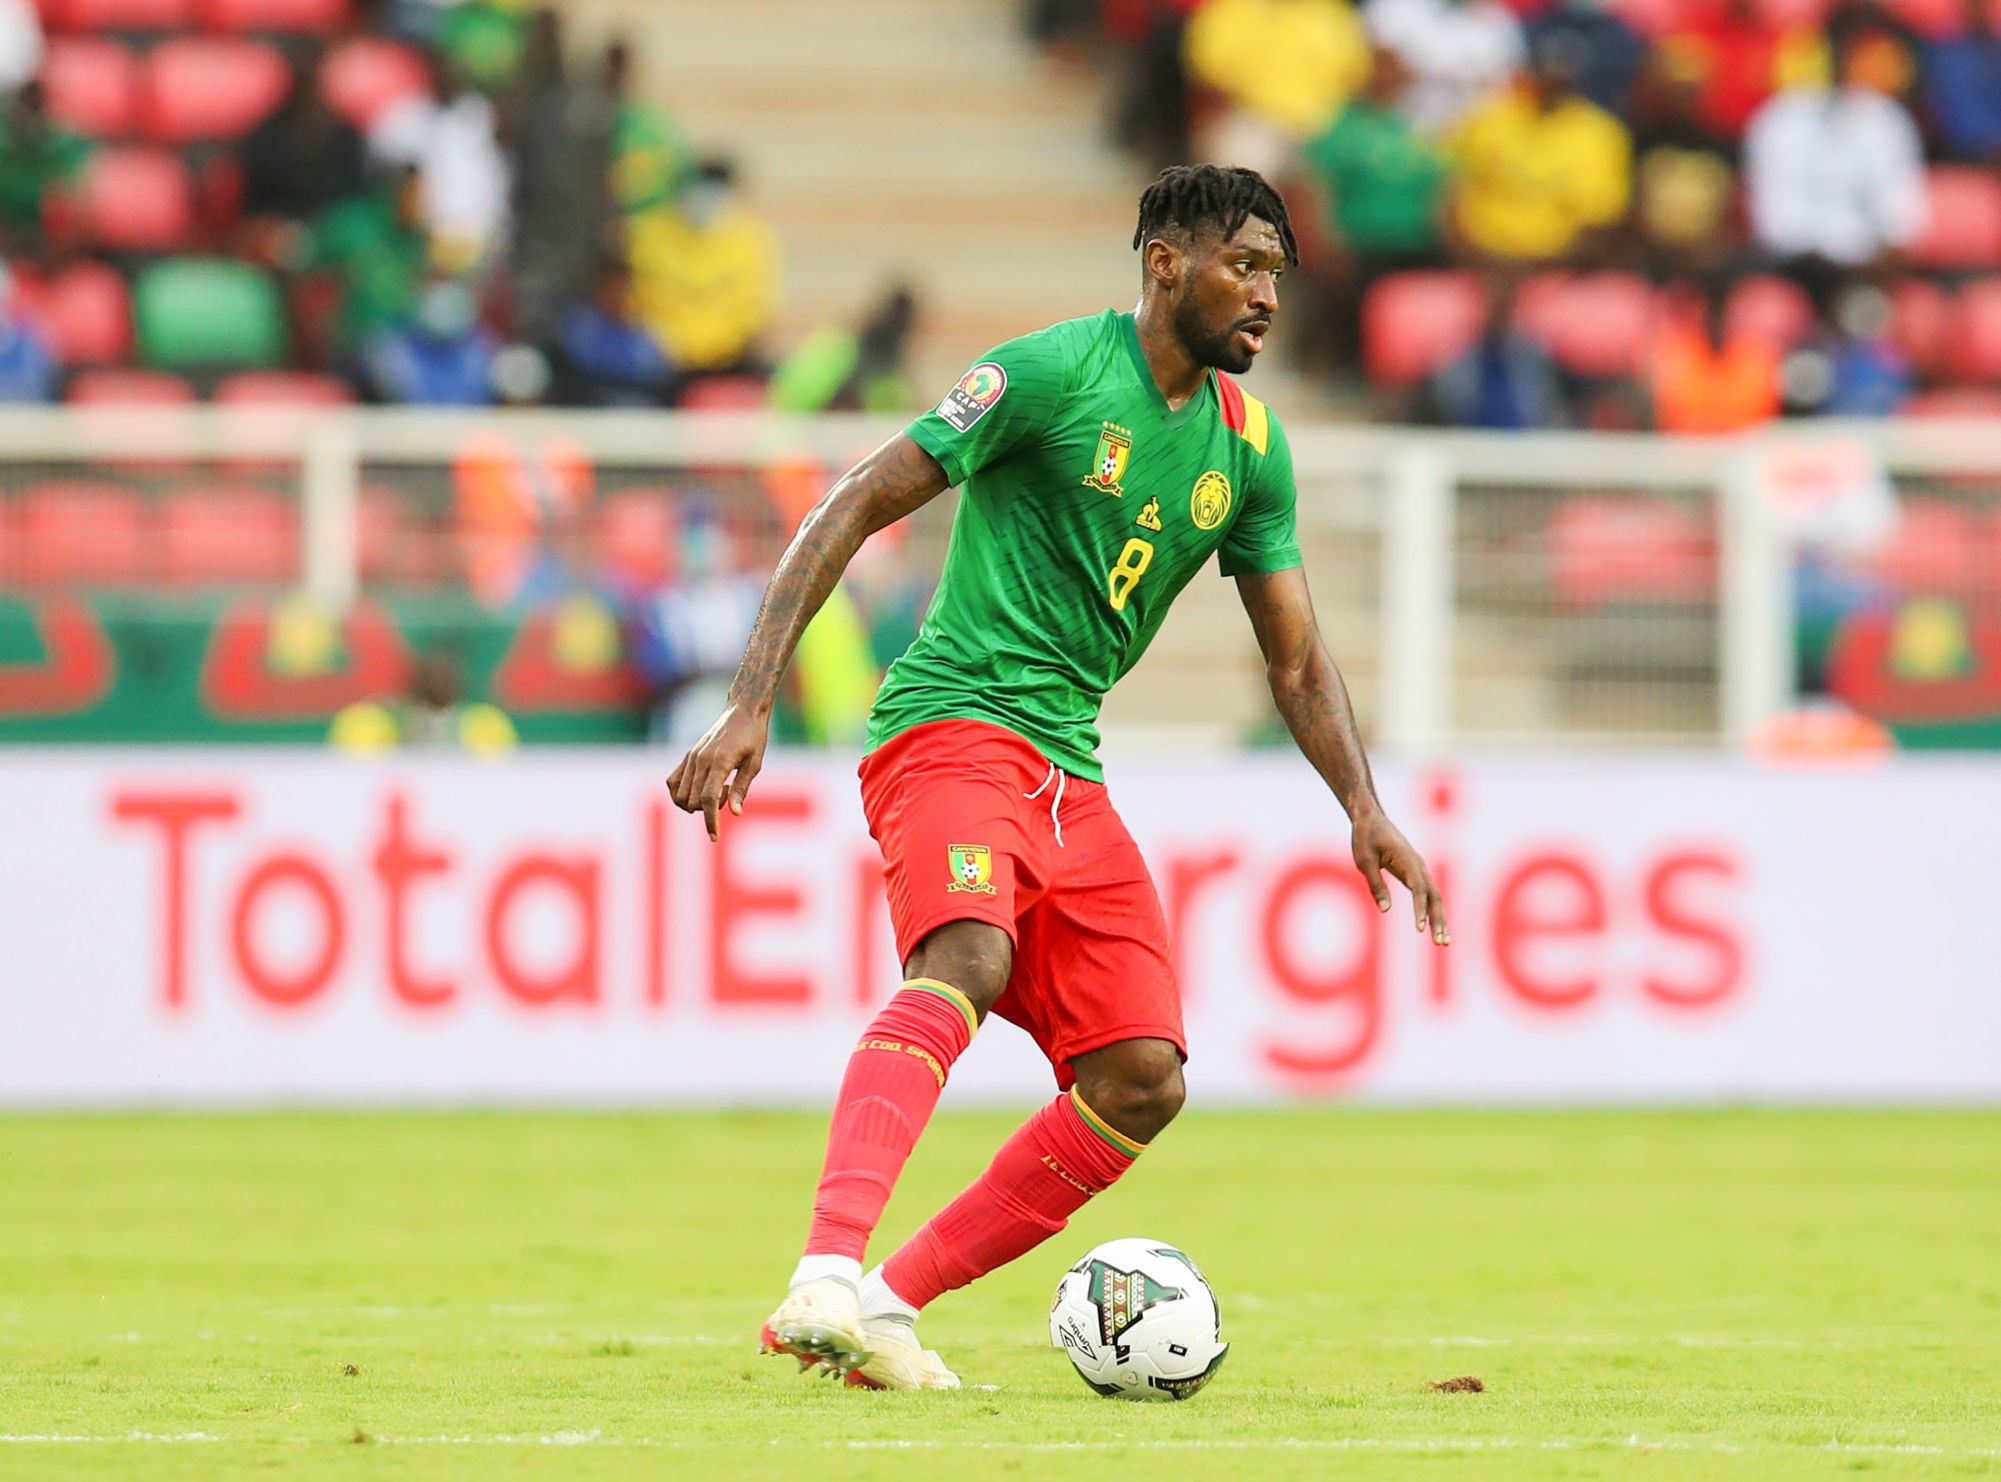 Andre Zambo Anguissa of Cameroon during the 2021 Africa Cup of Nations Afcon Finals football Cameroon and Ethiopia at Olembe Stadium in Yaounde, Cameroon on 13 January 2022 ©Muzi Ntombela/Sports Inc - Photo by Icon sport